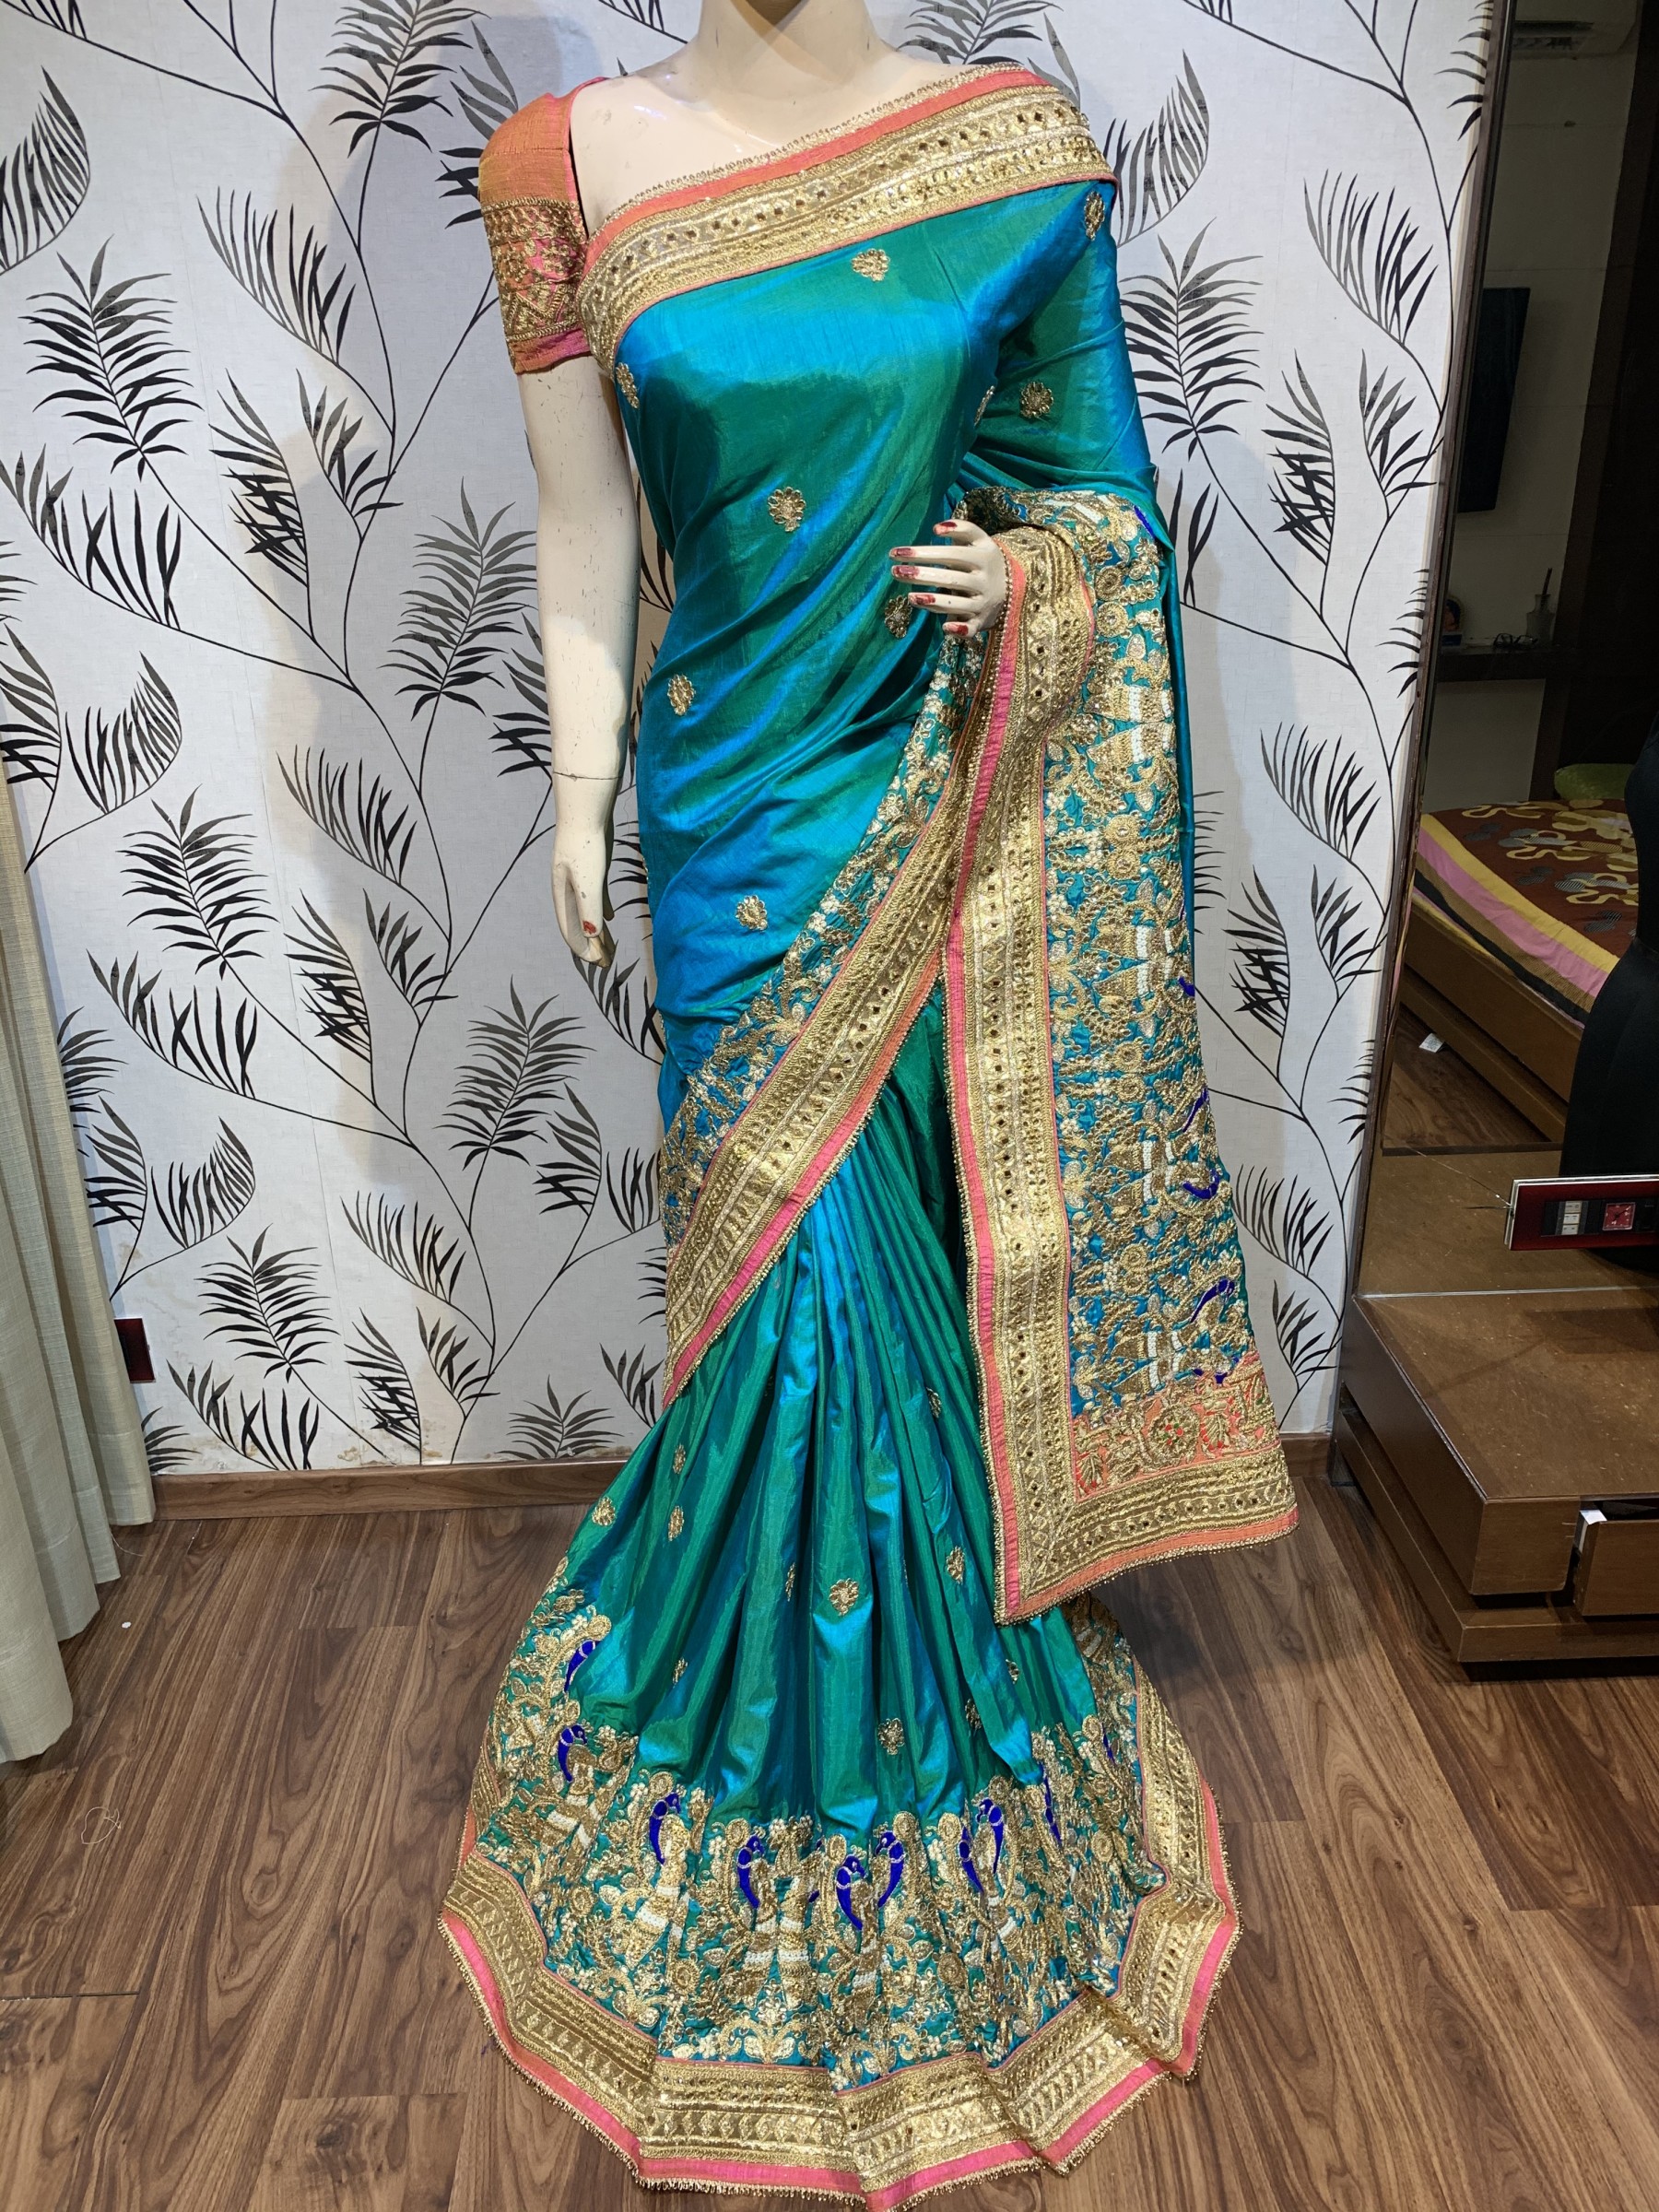 Mal Mal Silk Wedding Wear Saree In Turquoise color With Embroidery Work & Crystal stone work